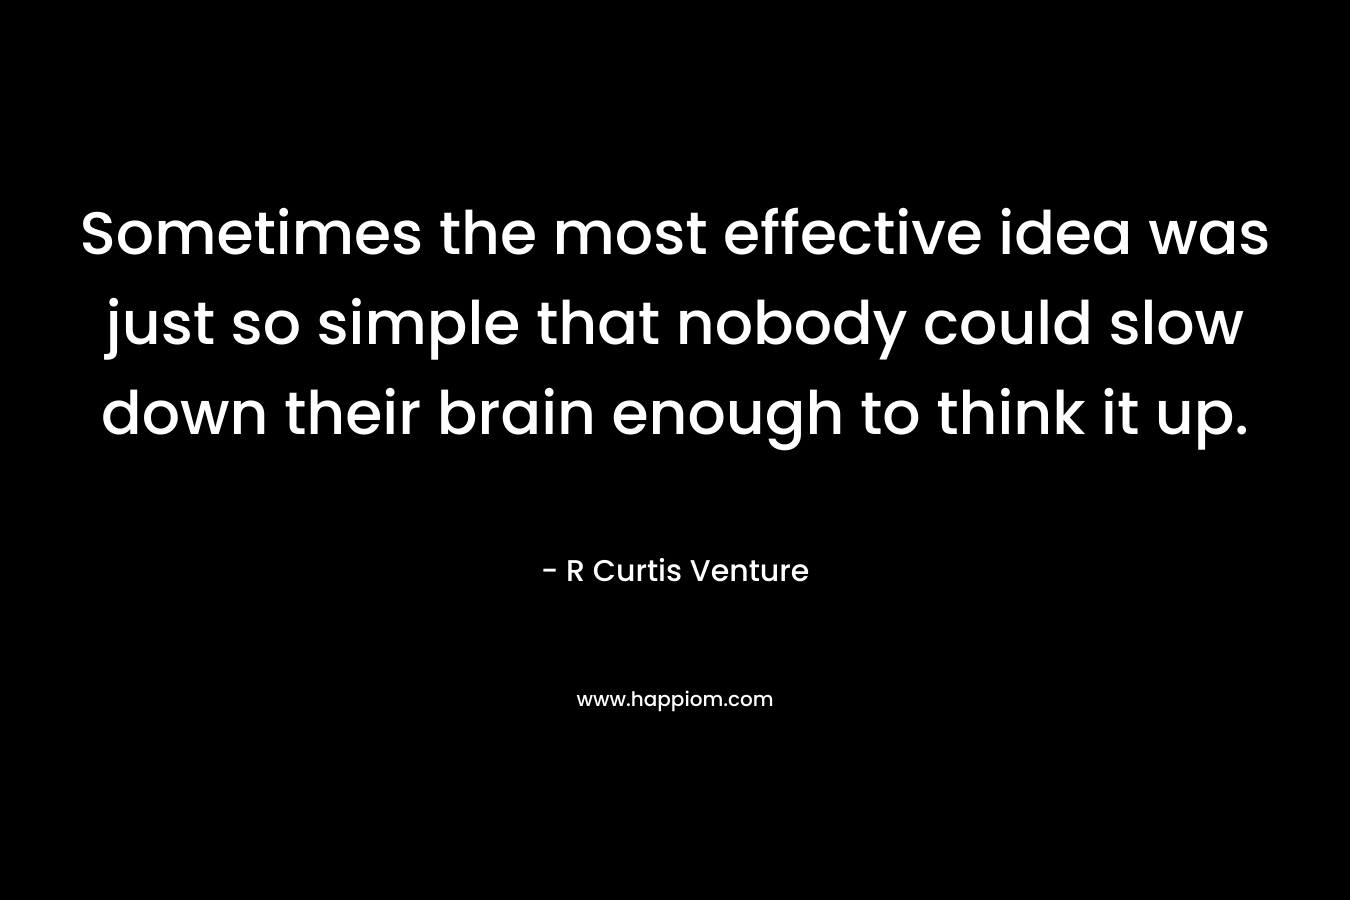 Sometimes the most effective idea was just so simple that nobody could slow down their brain enough to think it up. – R Curtis Venture